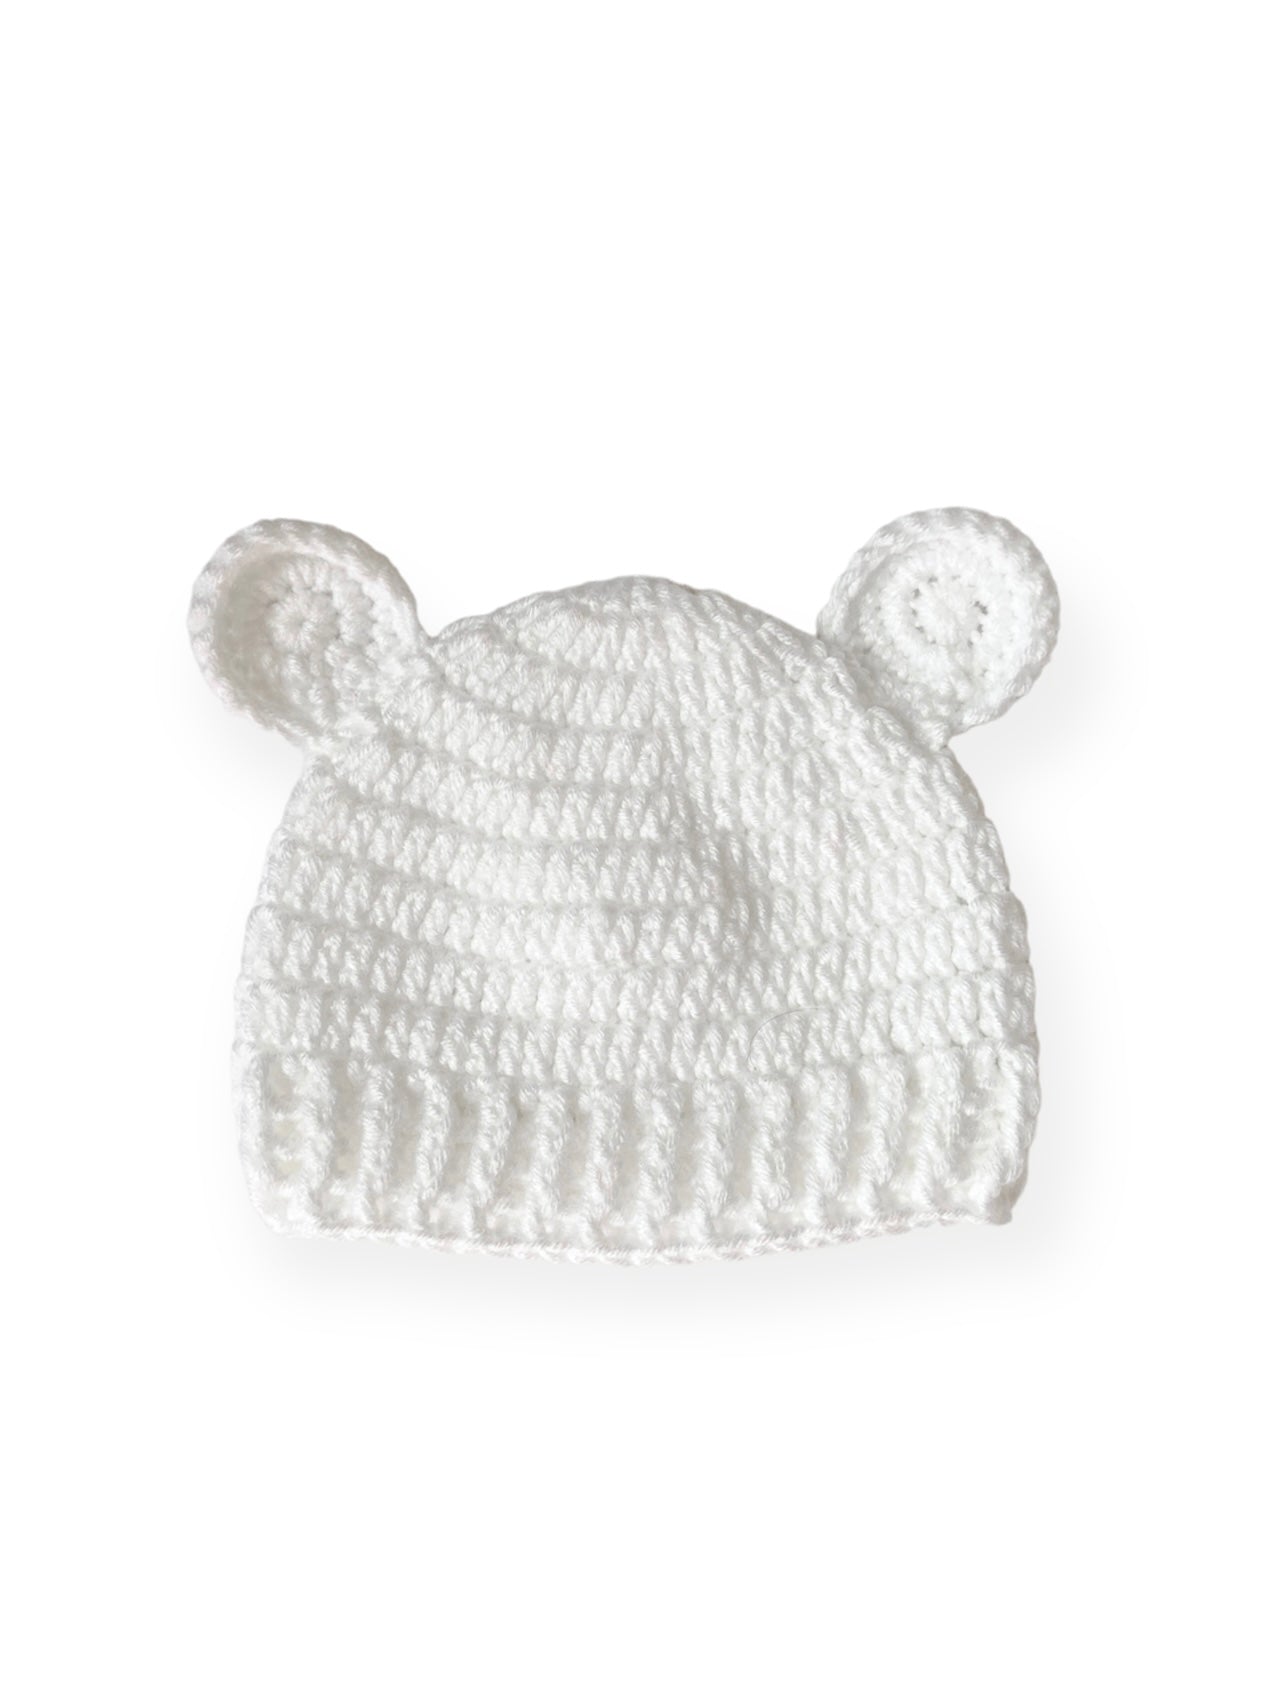 Mouse Beanie - triconuts